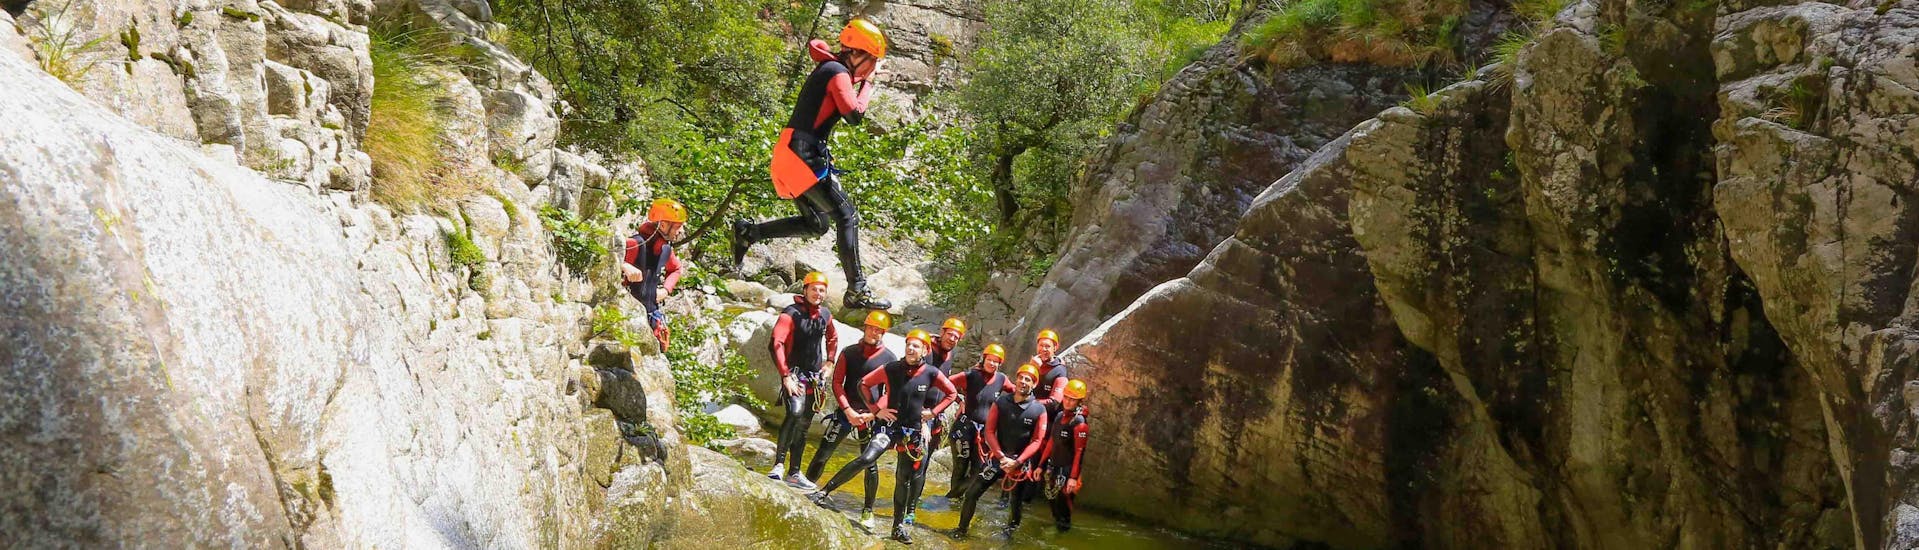 A tourist is jumping in the baracci canyon during his activity canyoning discovery with reves de cimes.